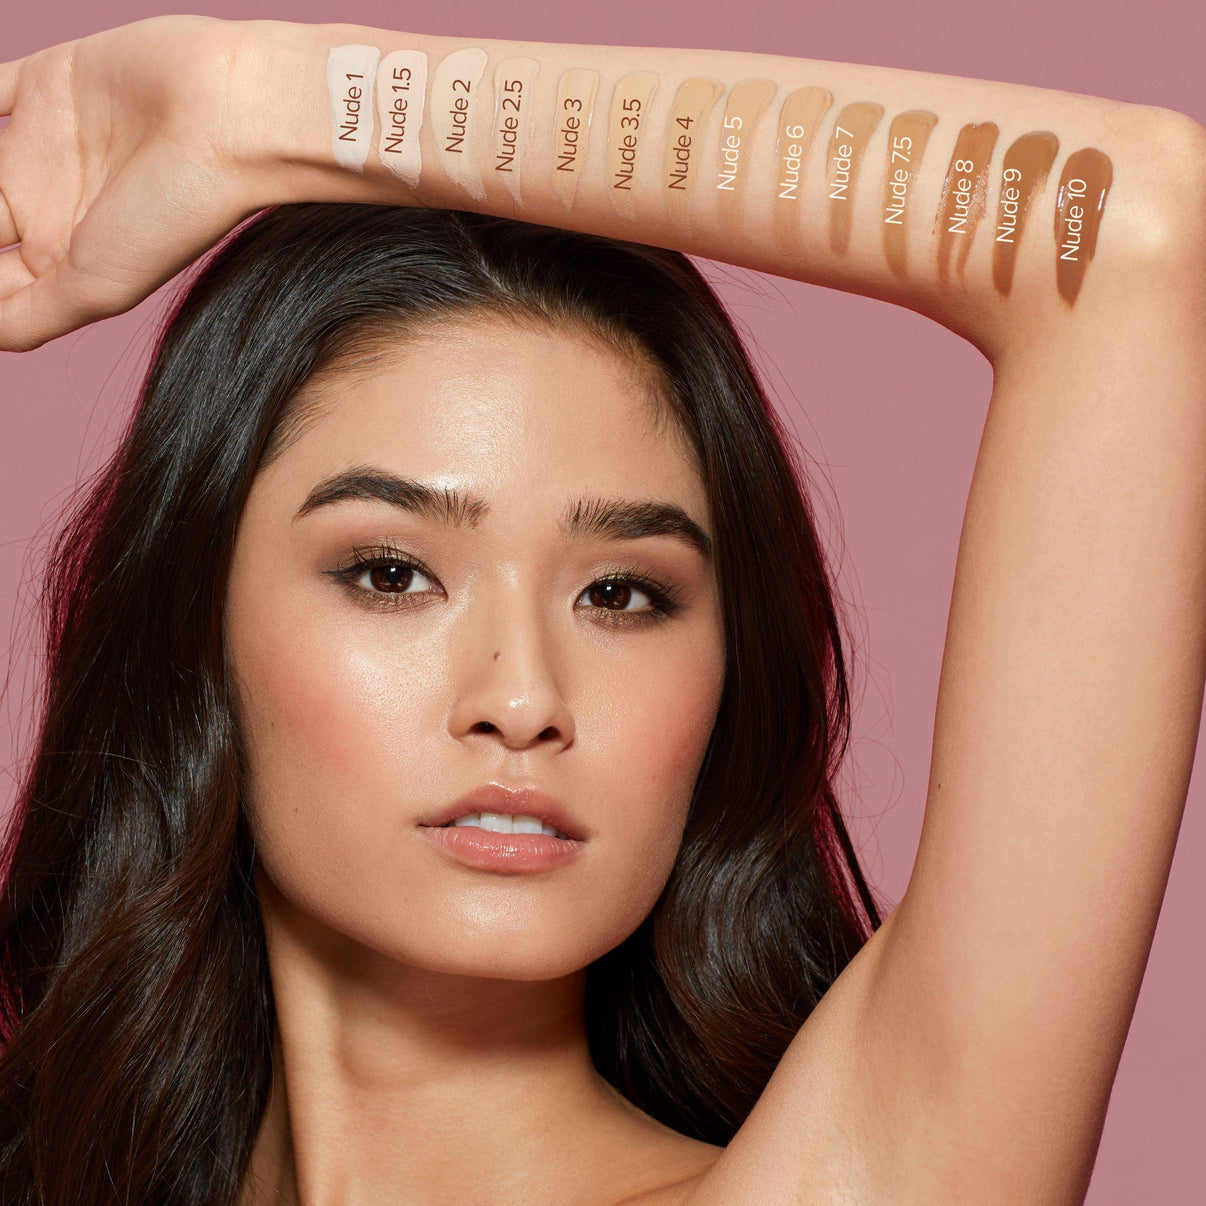 Young woman with swatches on her arm of Tinted Cover nude 3 and other shades